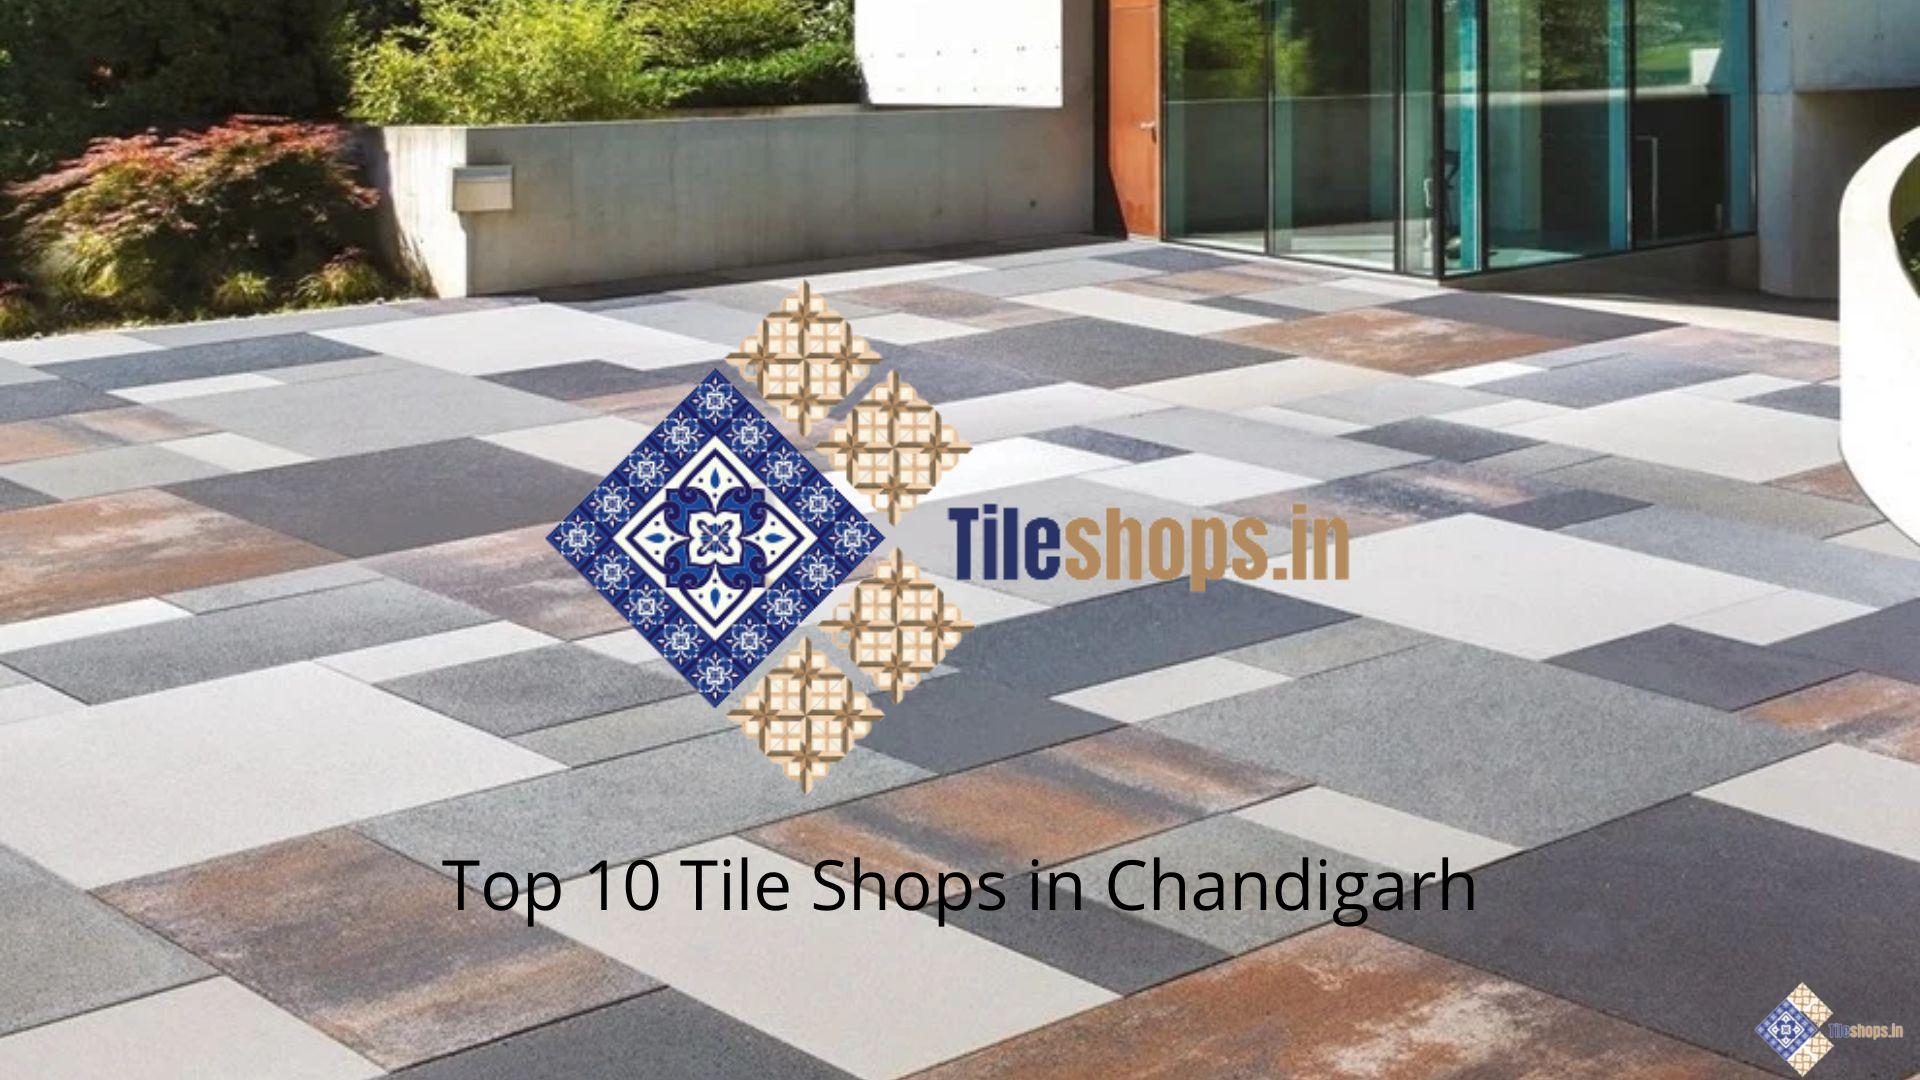 Top 10 Tile Shops in Chandigarh